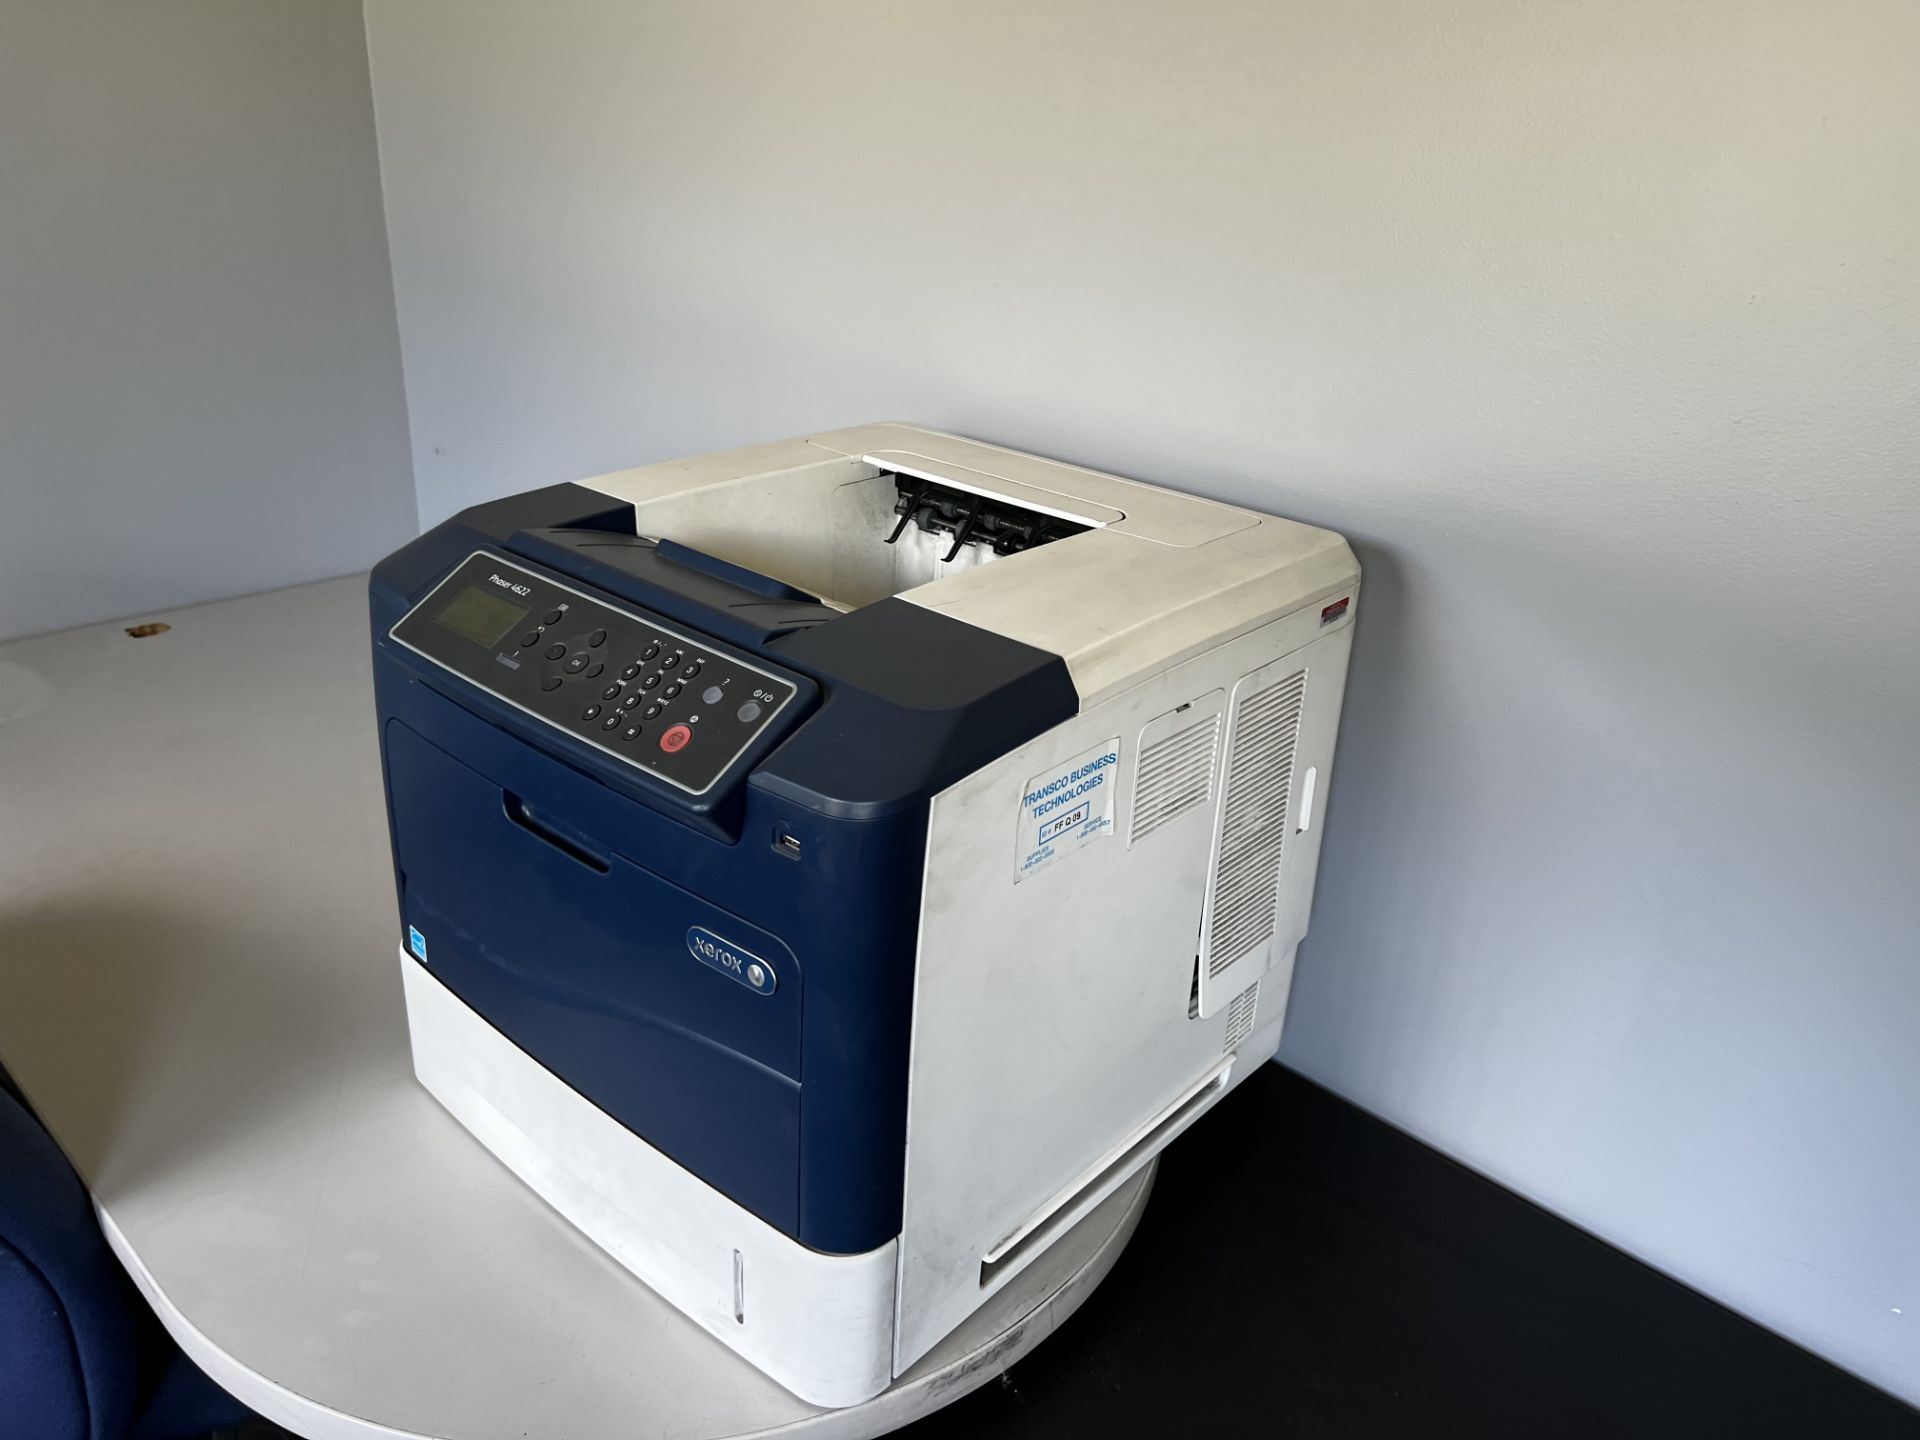 {LOT} - In Office: Desks - Chairs - Files - Printer MUST TAKE ALL (NO COPIER, NO PC'S) - Image 6 of 8